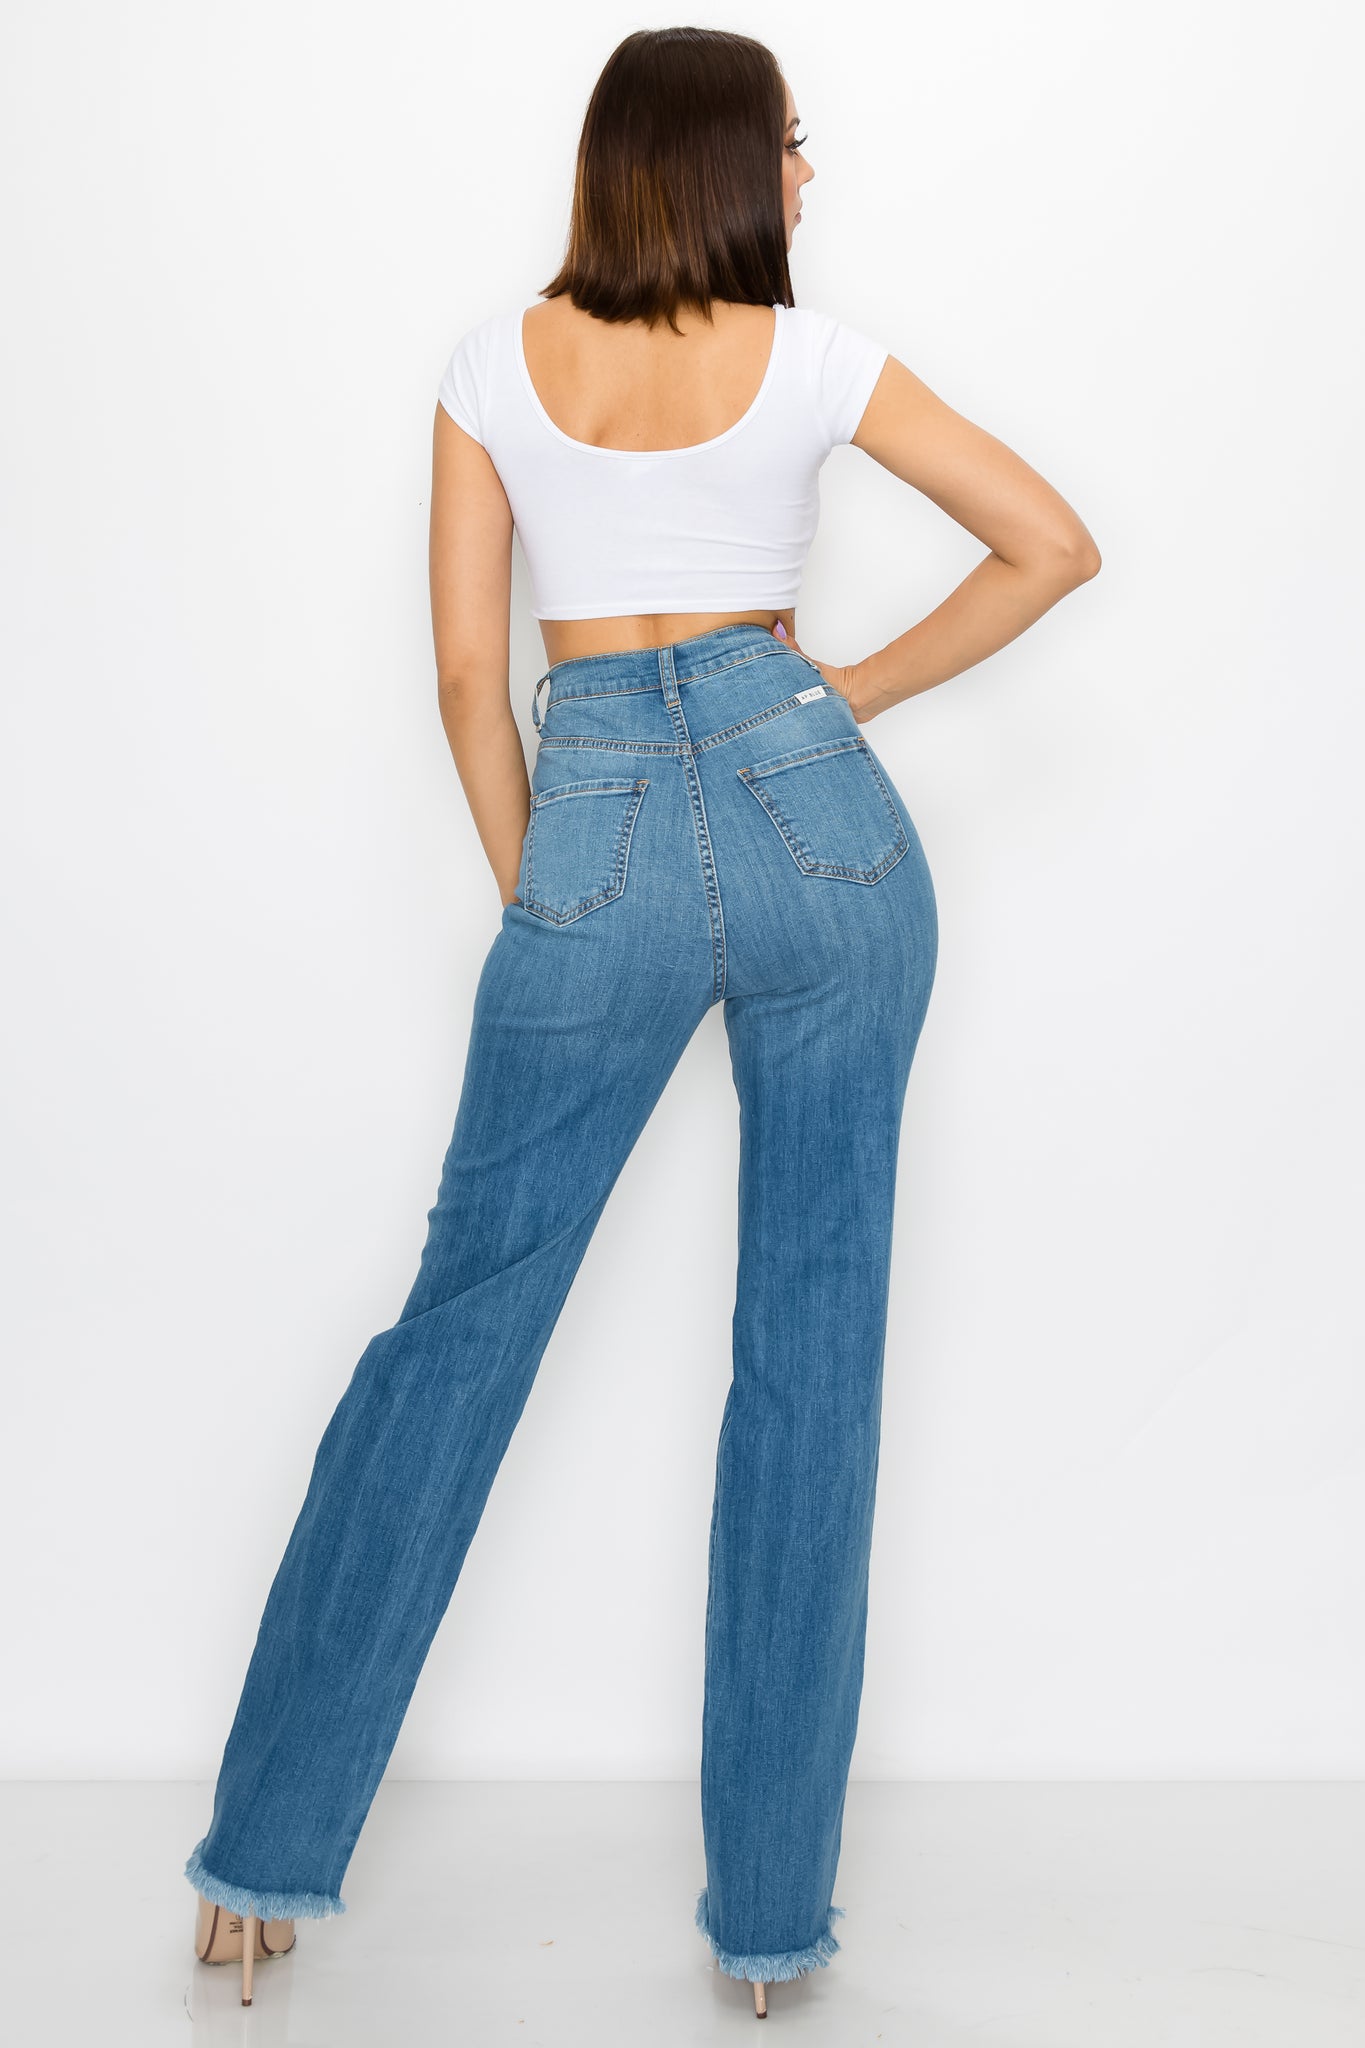 Aphrodite Jeans Super High Waisted Wide Leg Jeans with Crossed Zipper